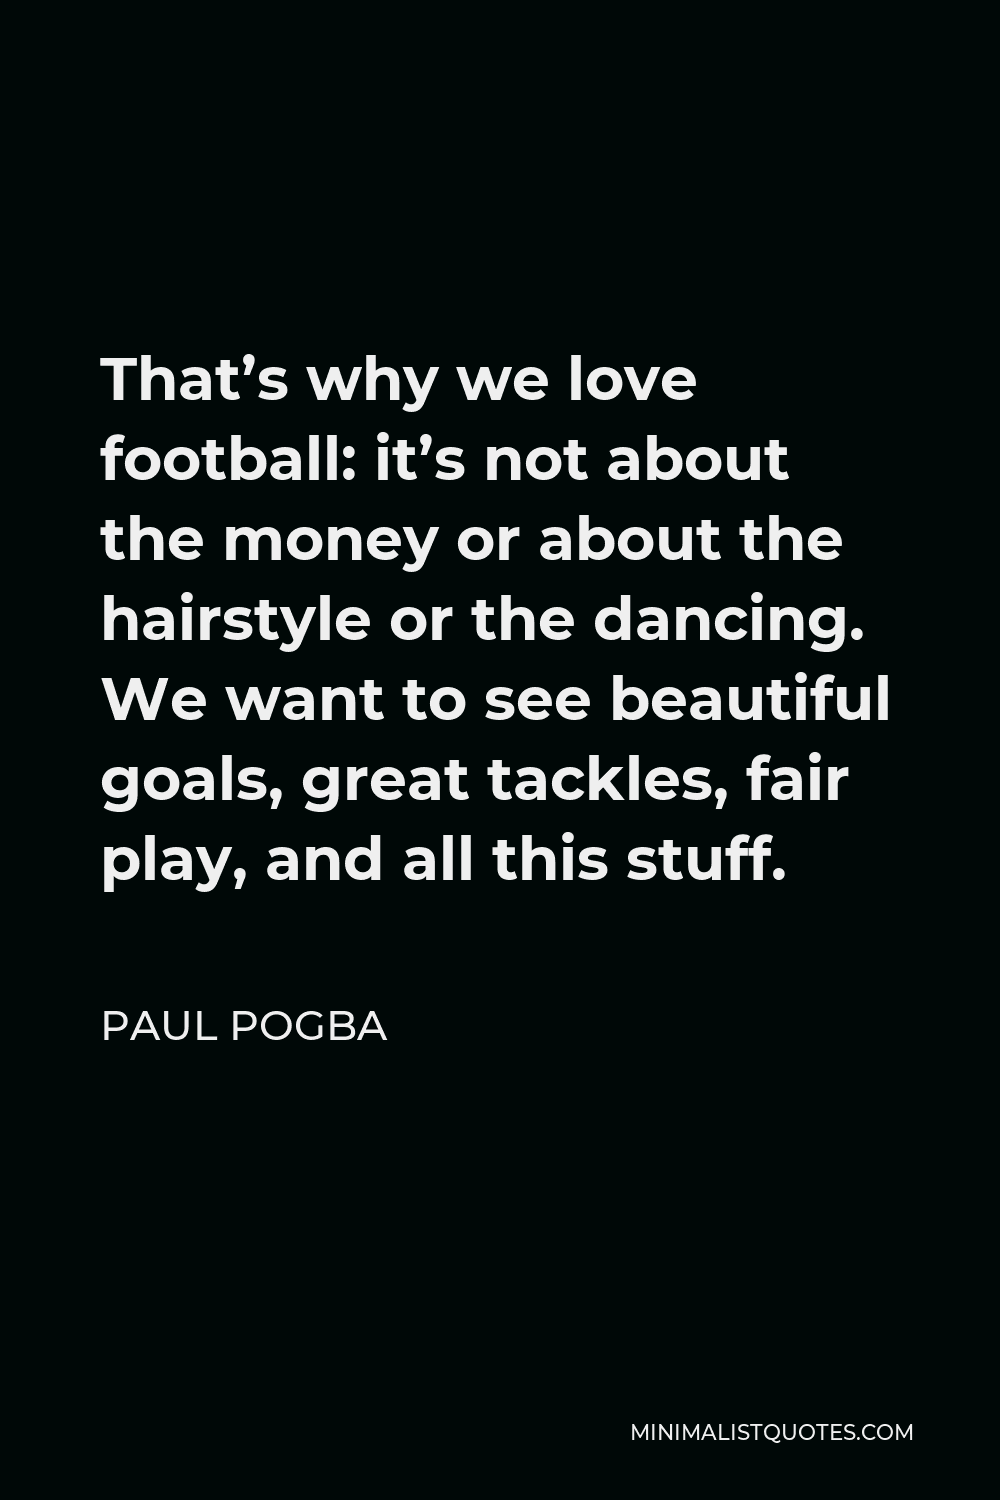 Paul Pogba Quote - That’s why we love football: it’s not about the money or about the hairstyle or the dancing. We want to see beautiful goals, great tackles, fair play, and all this stuff.